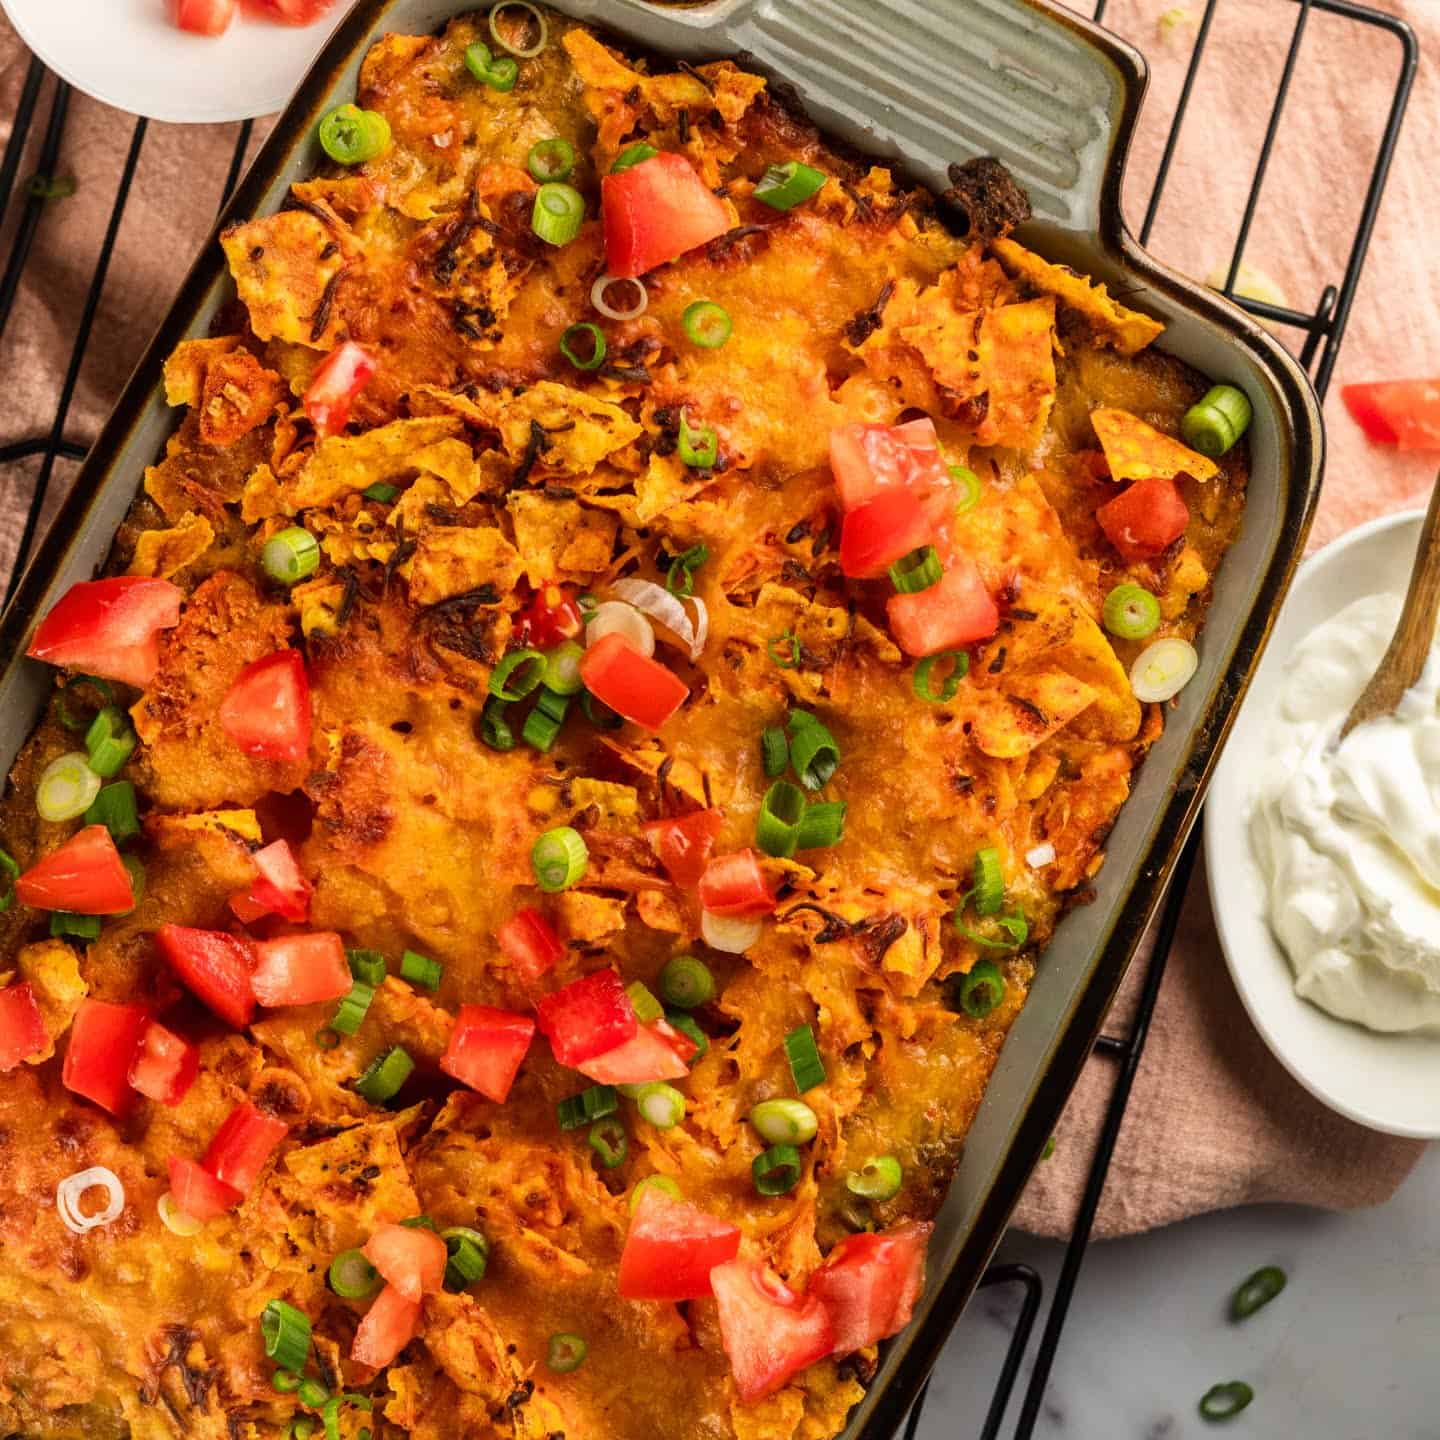 doritos casserole with sour cream and green onions with tomatoes